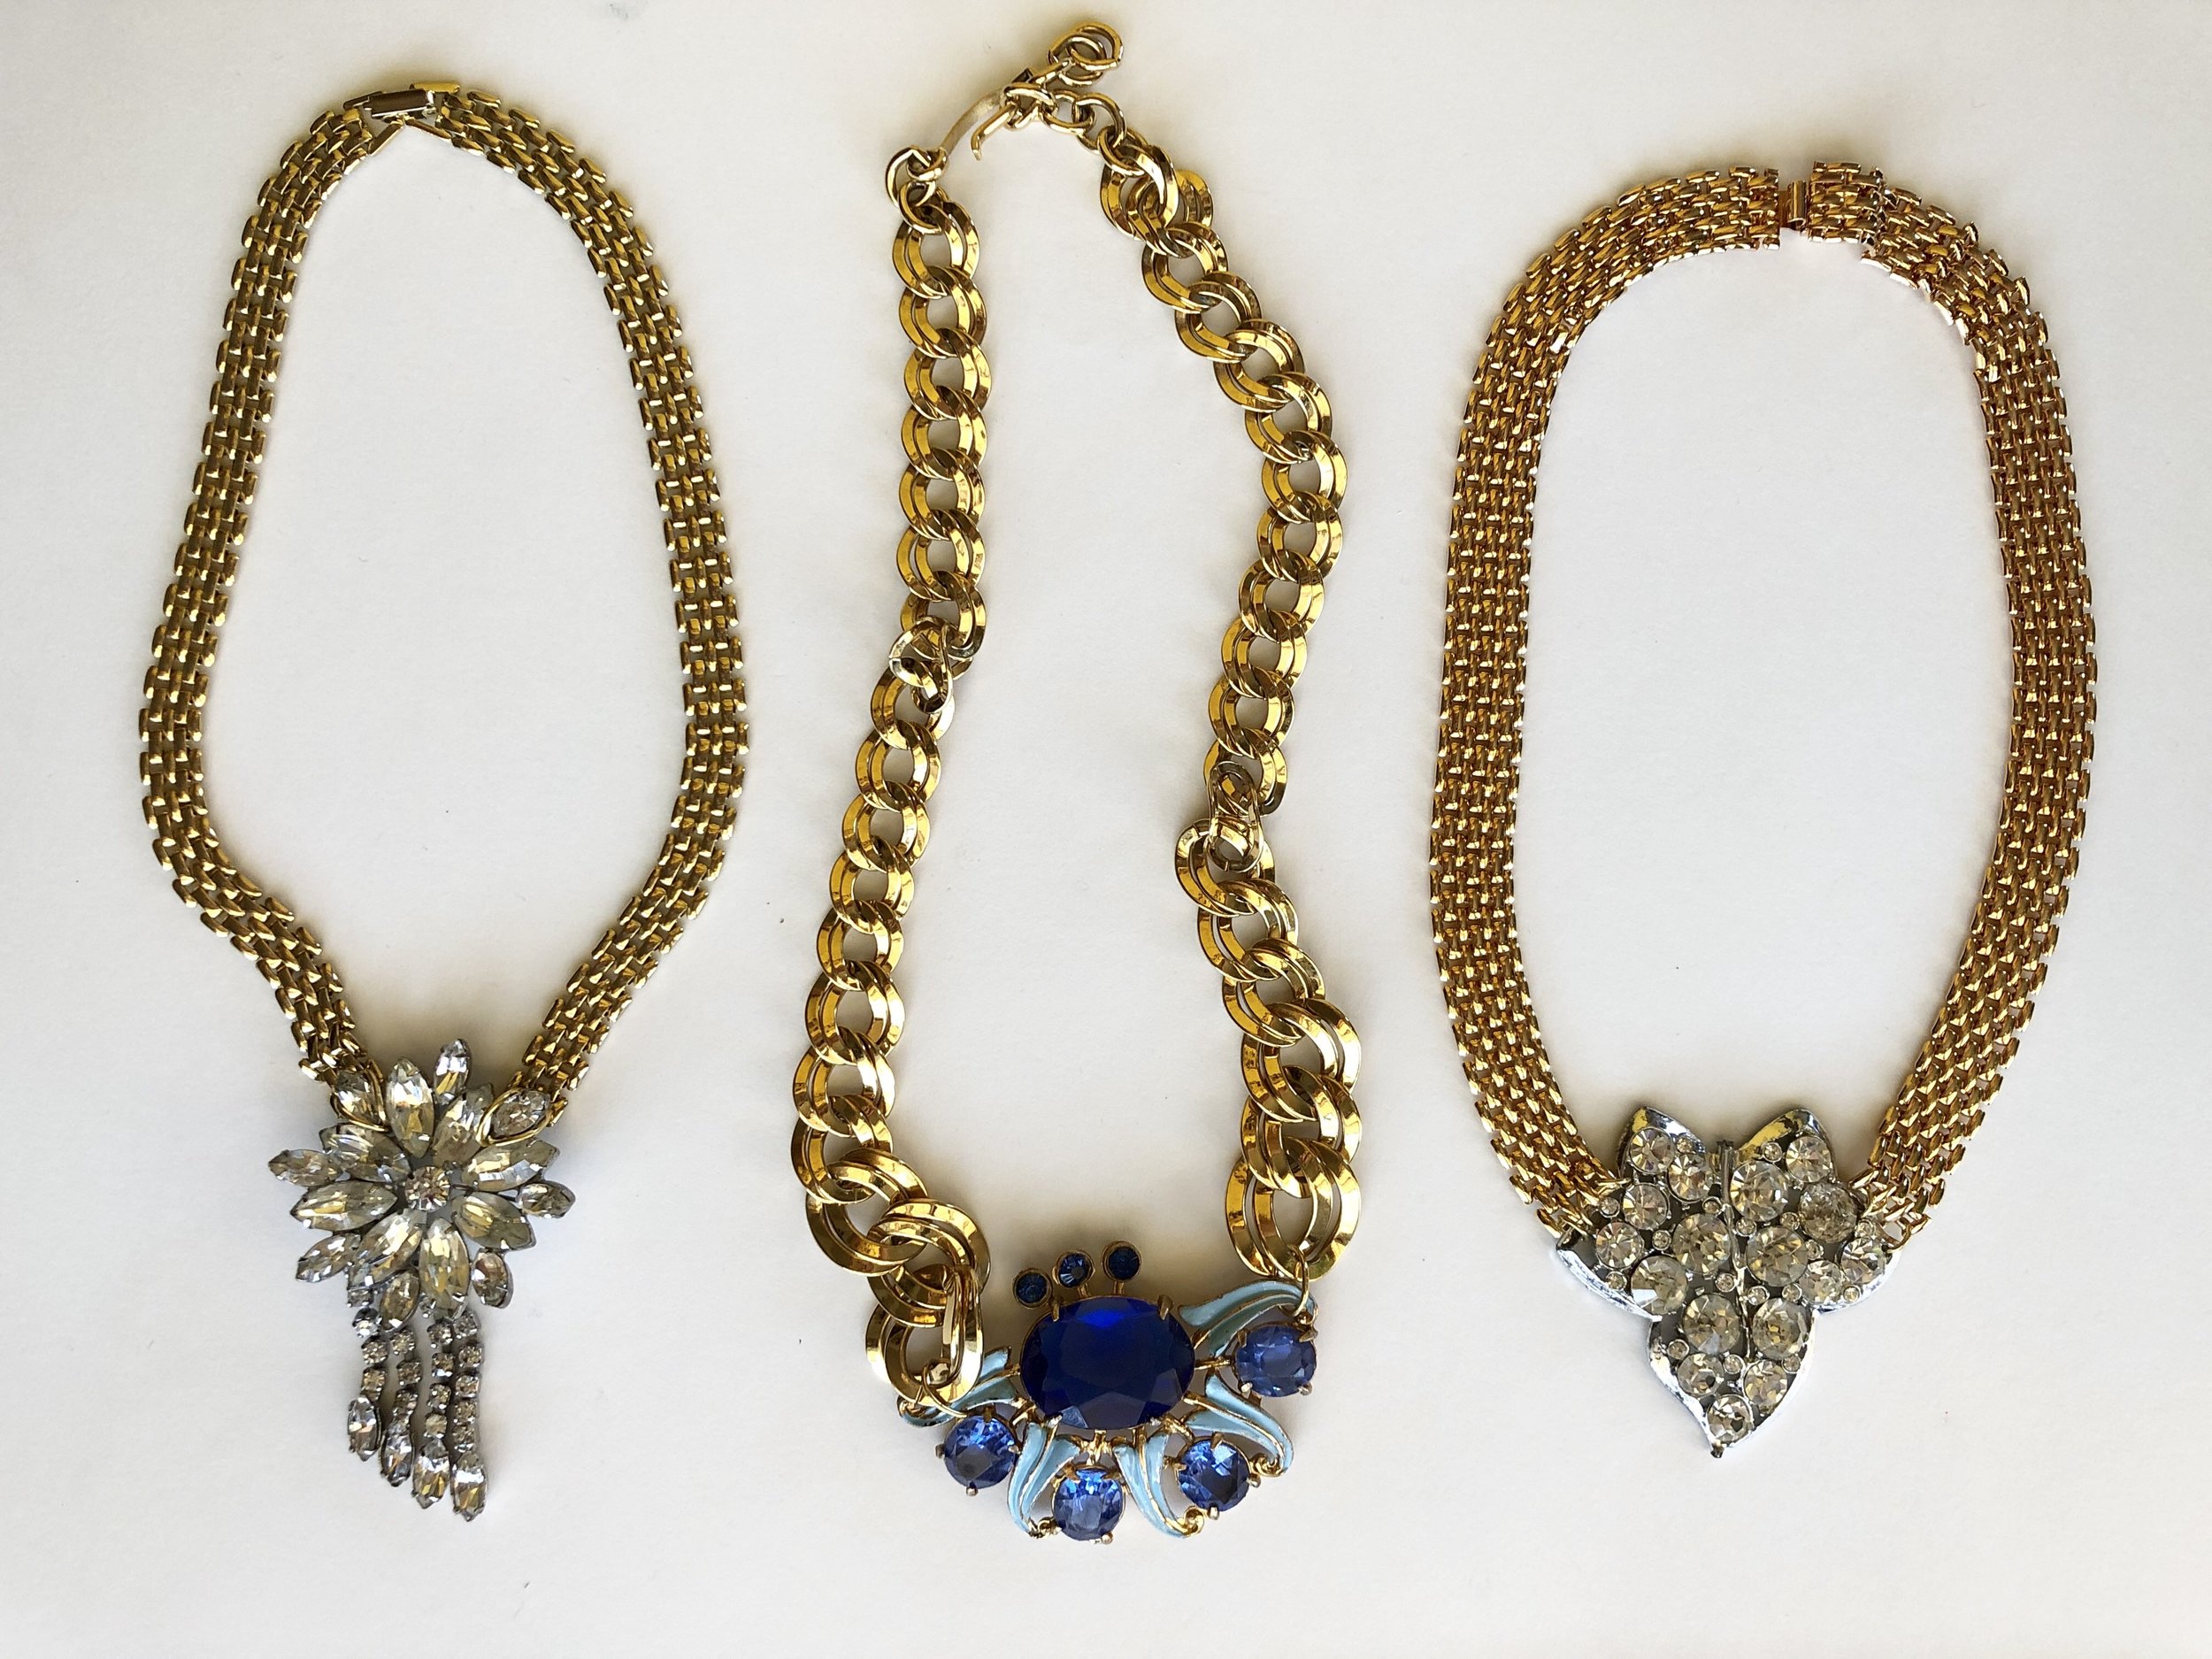 One of a Kind Statement Necklaces